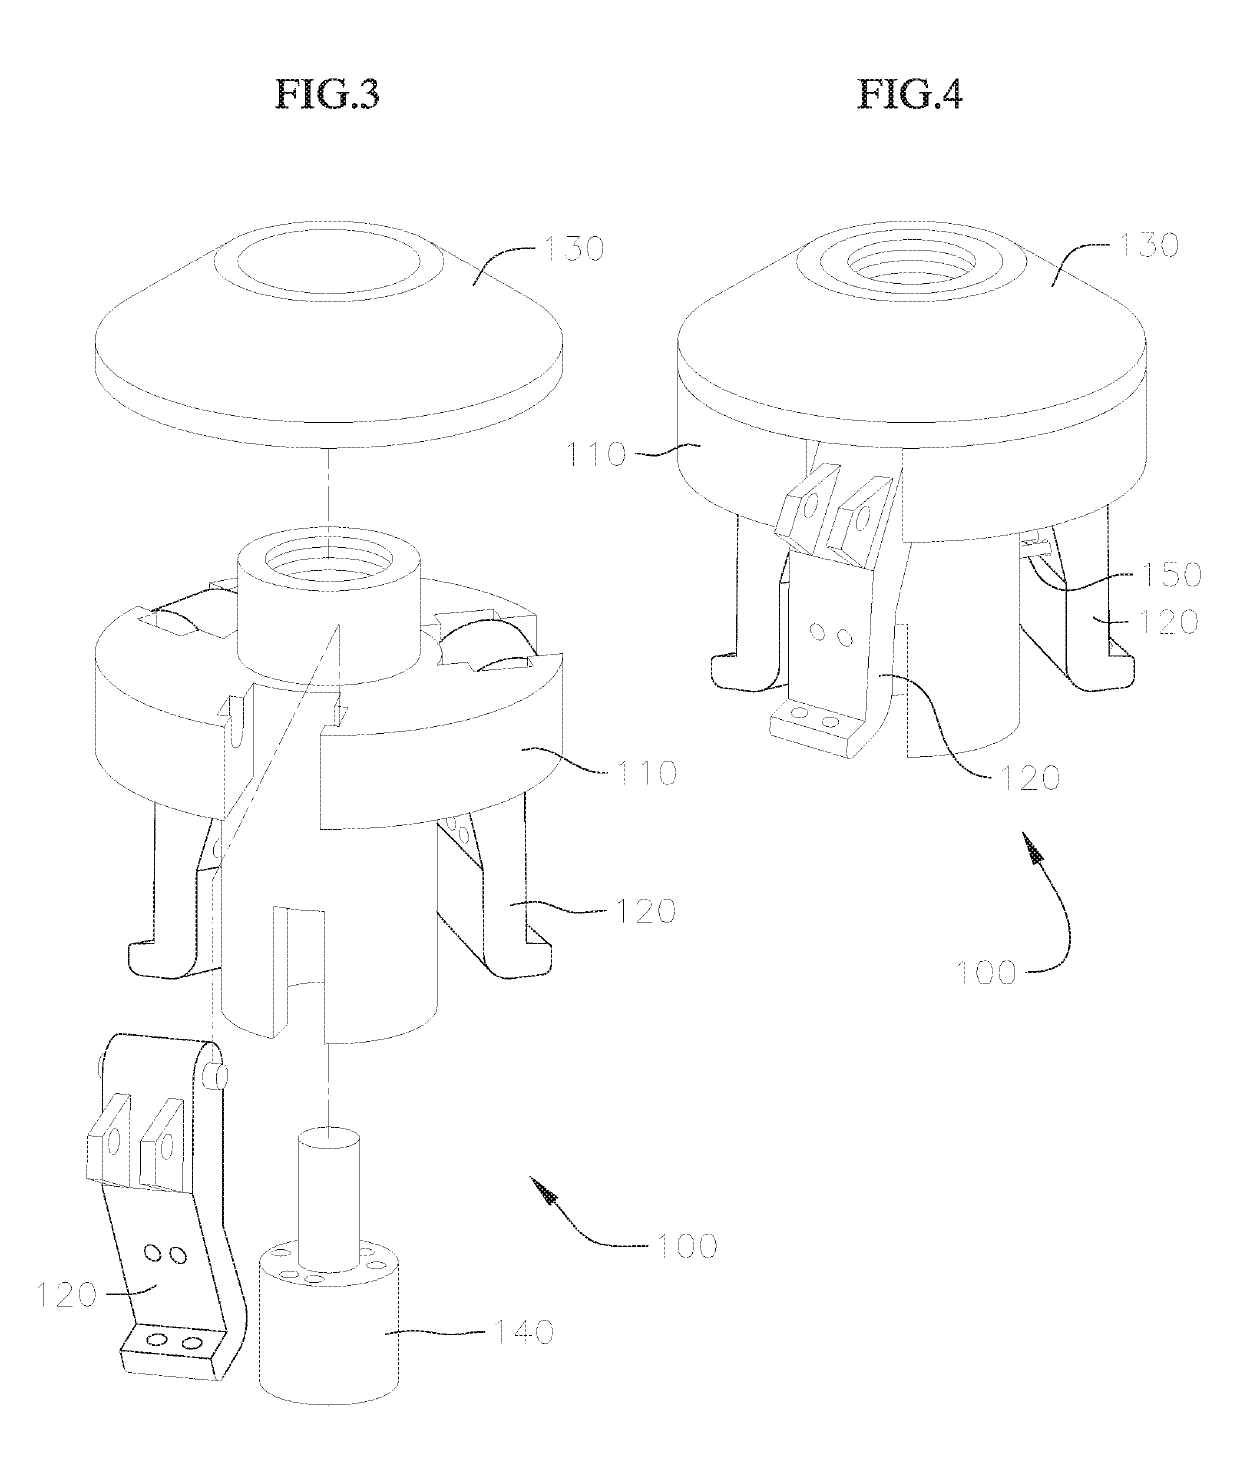 Prosthetic valve holders with automatic deploying mechanisms